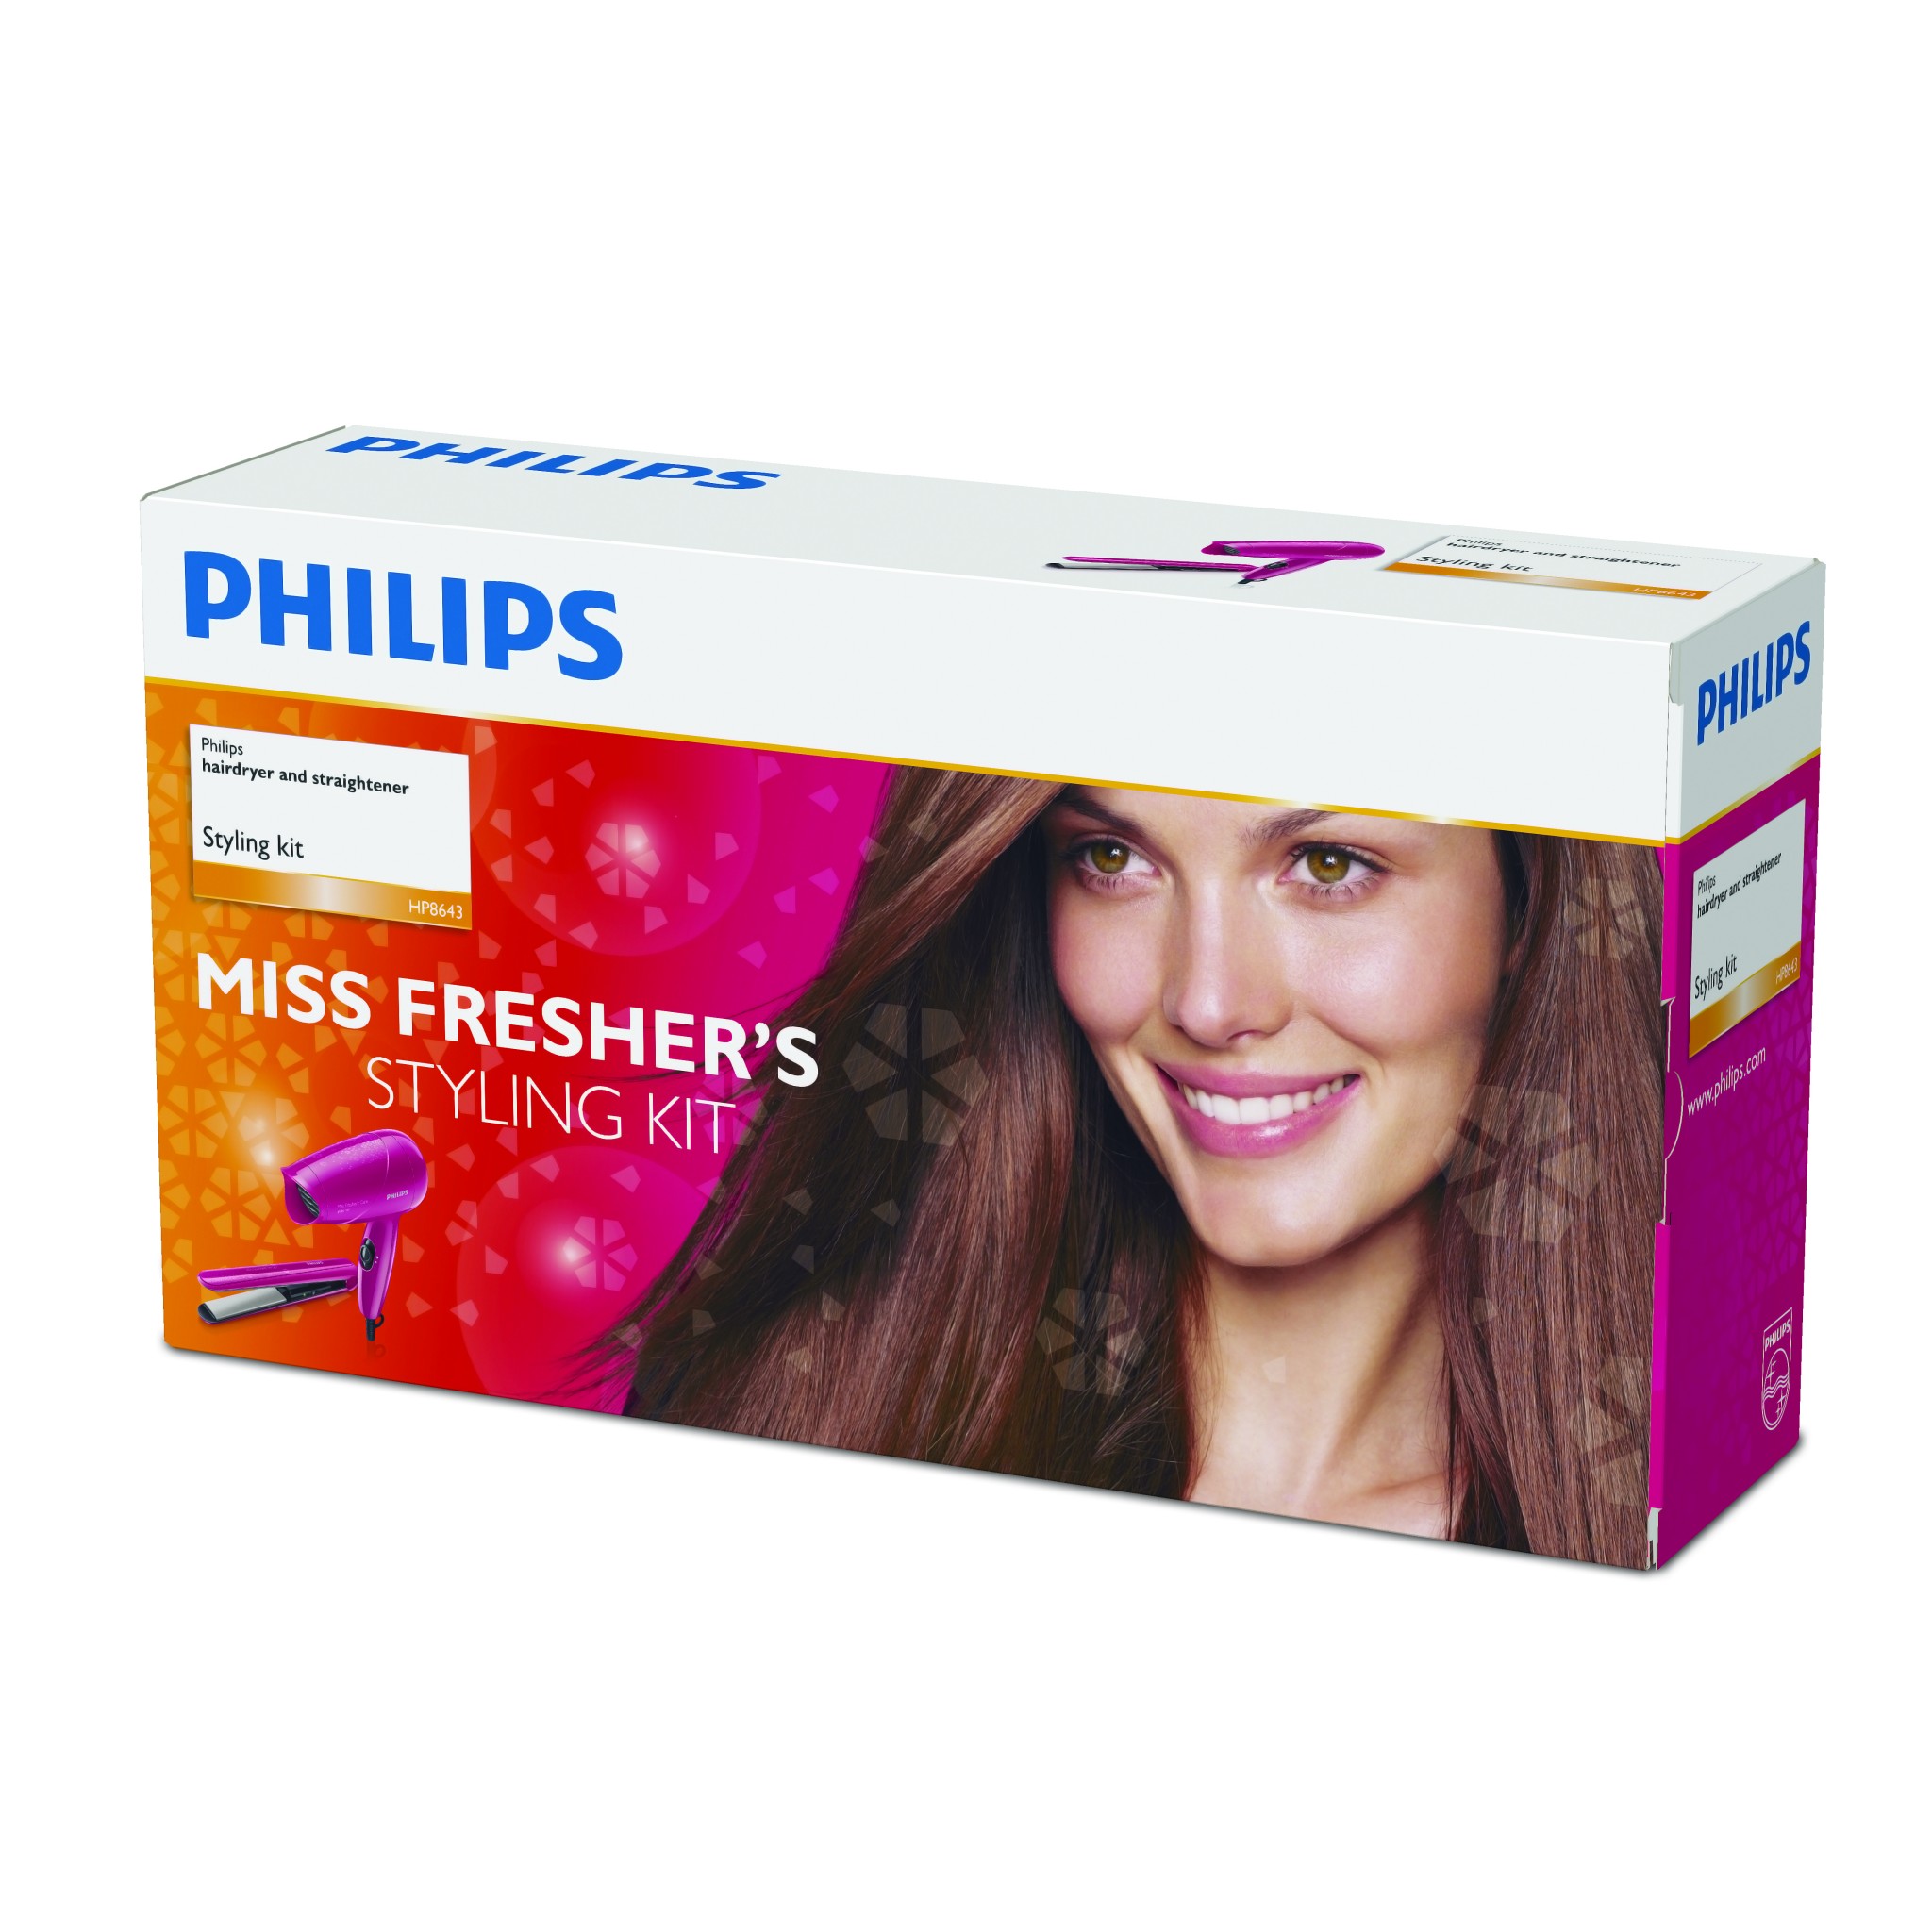 PHILIPS HP8643 HAIR STYLING KIT (PINK)